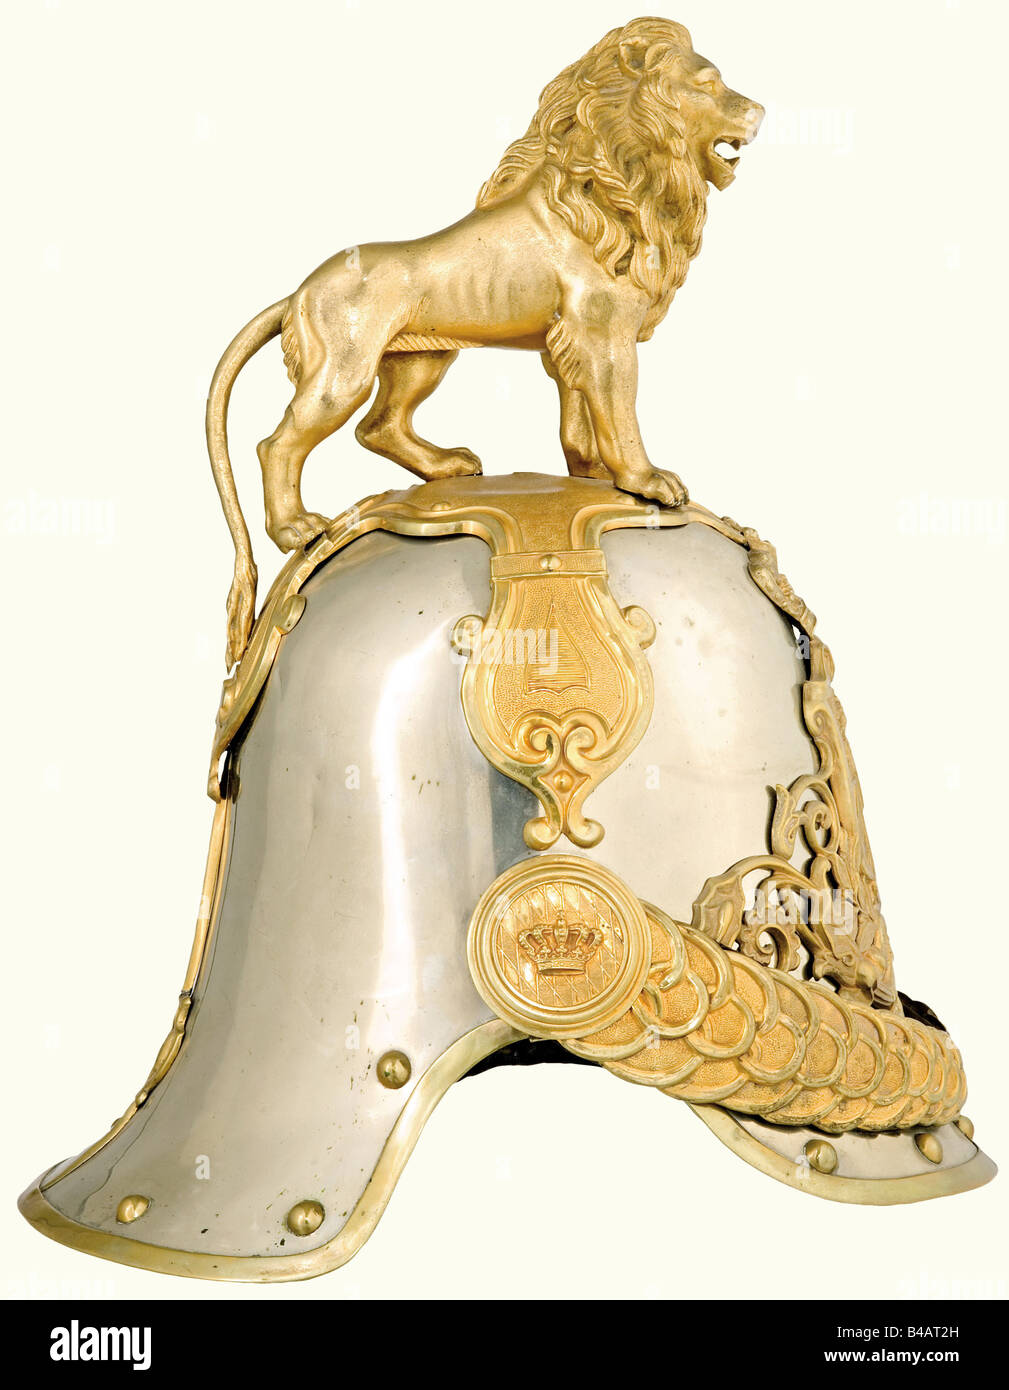 A helmet of 1852 pattern for the Archers Life Guard., In the court gala version with the standing, gold plated lion. Nickel-silver skull with fire-gilded tombac fittings, broad metal chinscales on crown rosettes. The lion has the part number '6' on the rear leg. Original leather lining (damaged). The part number '6' is soldered into the rear peak. Crack, visible only from the inside of the skull. Rare helmet. historic, historical, 19th century, Bavaria, Bavarian, German, Germany, Southern Germany, the South of Germany, object, objects, stills, militaria, clippi, Stock Photo